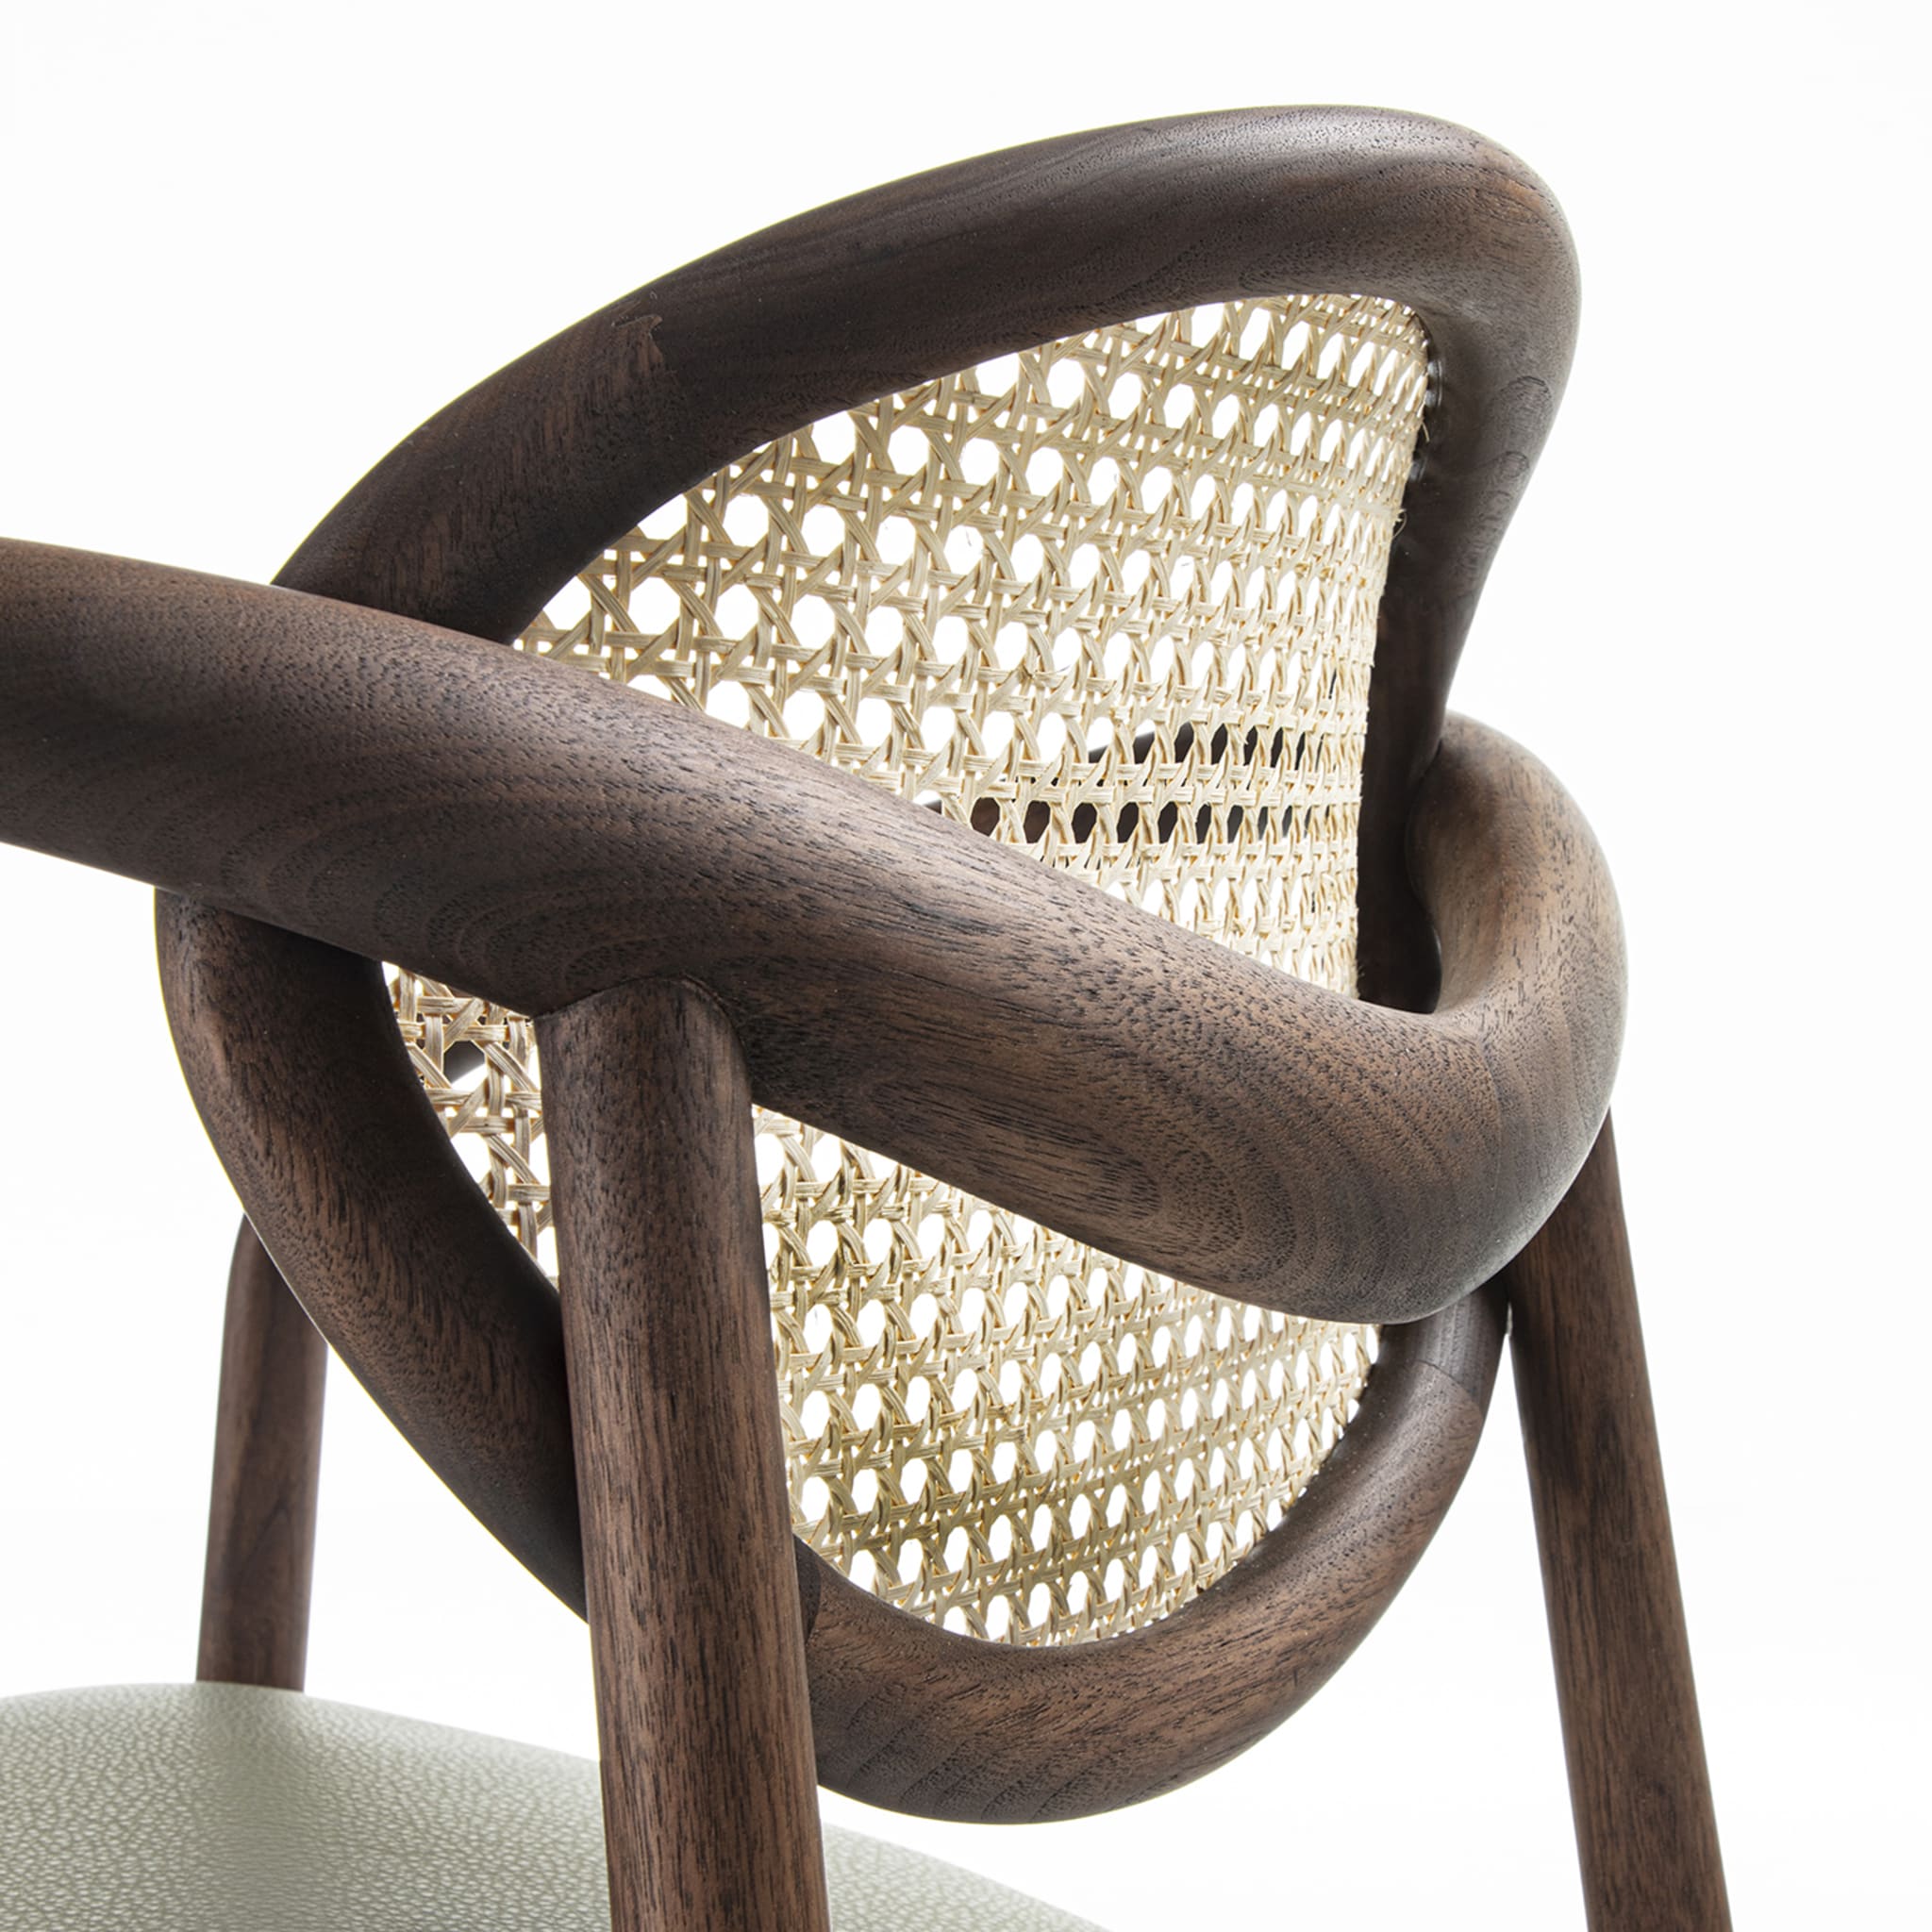 Marlena Green Chair With Arms by Studio Nove.3 - Alternative view 1